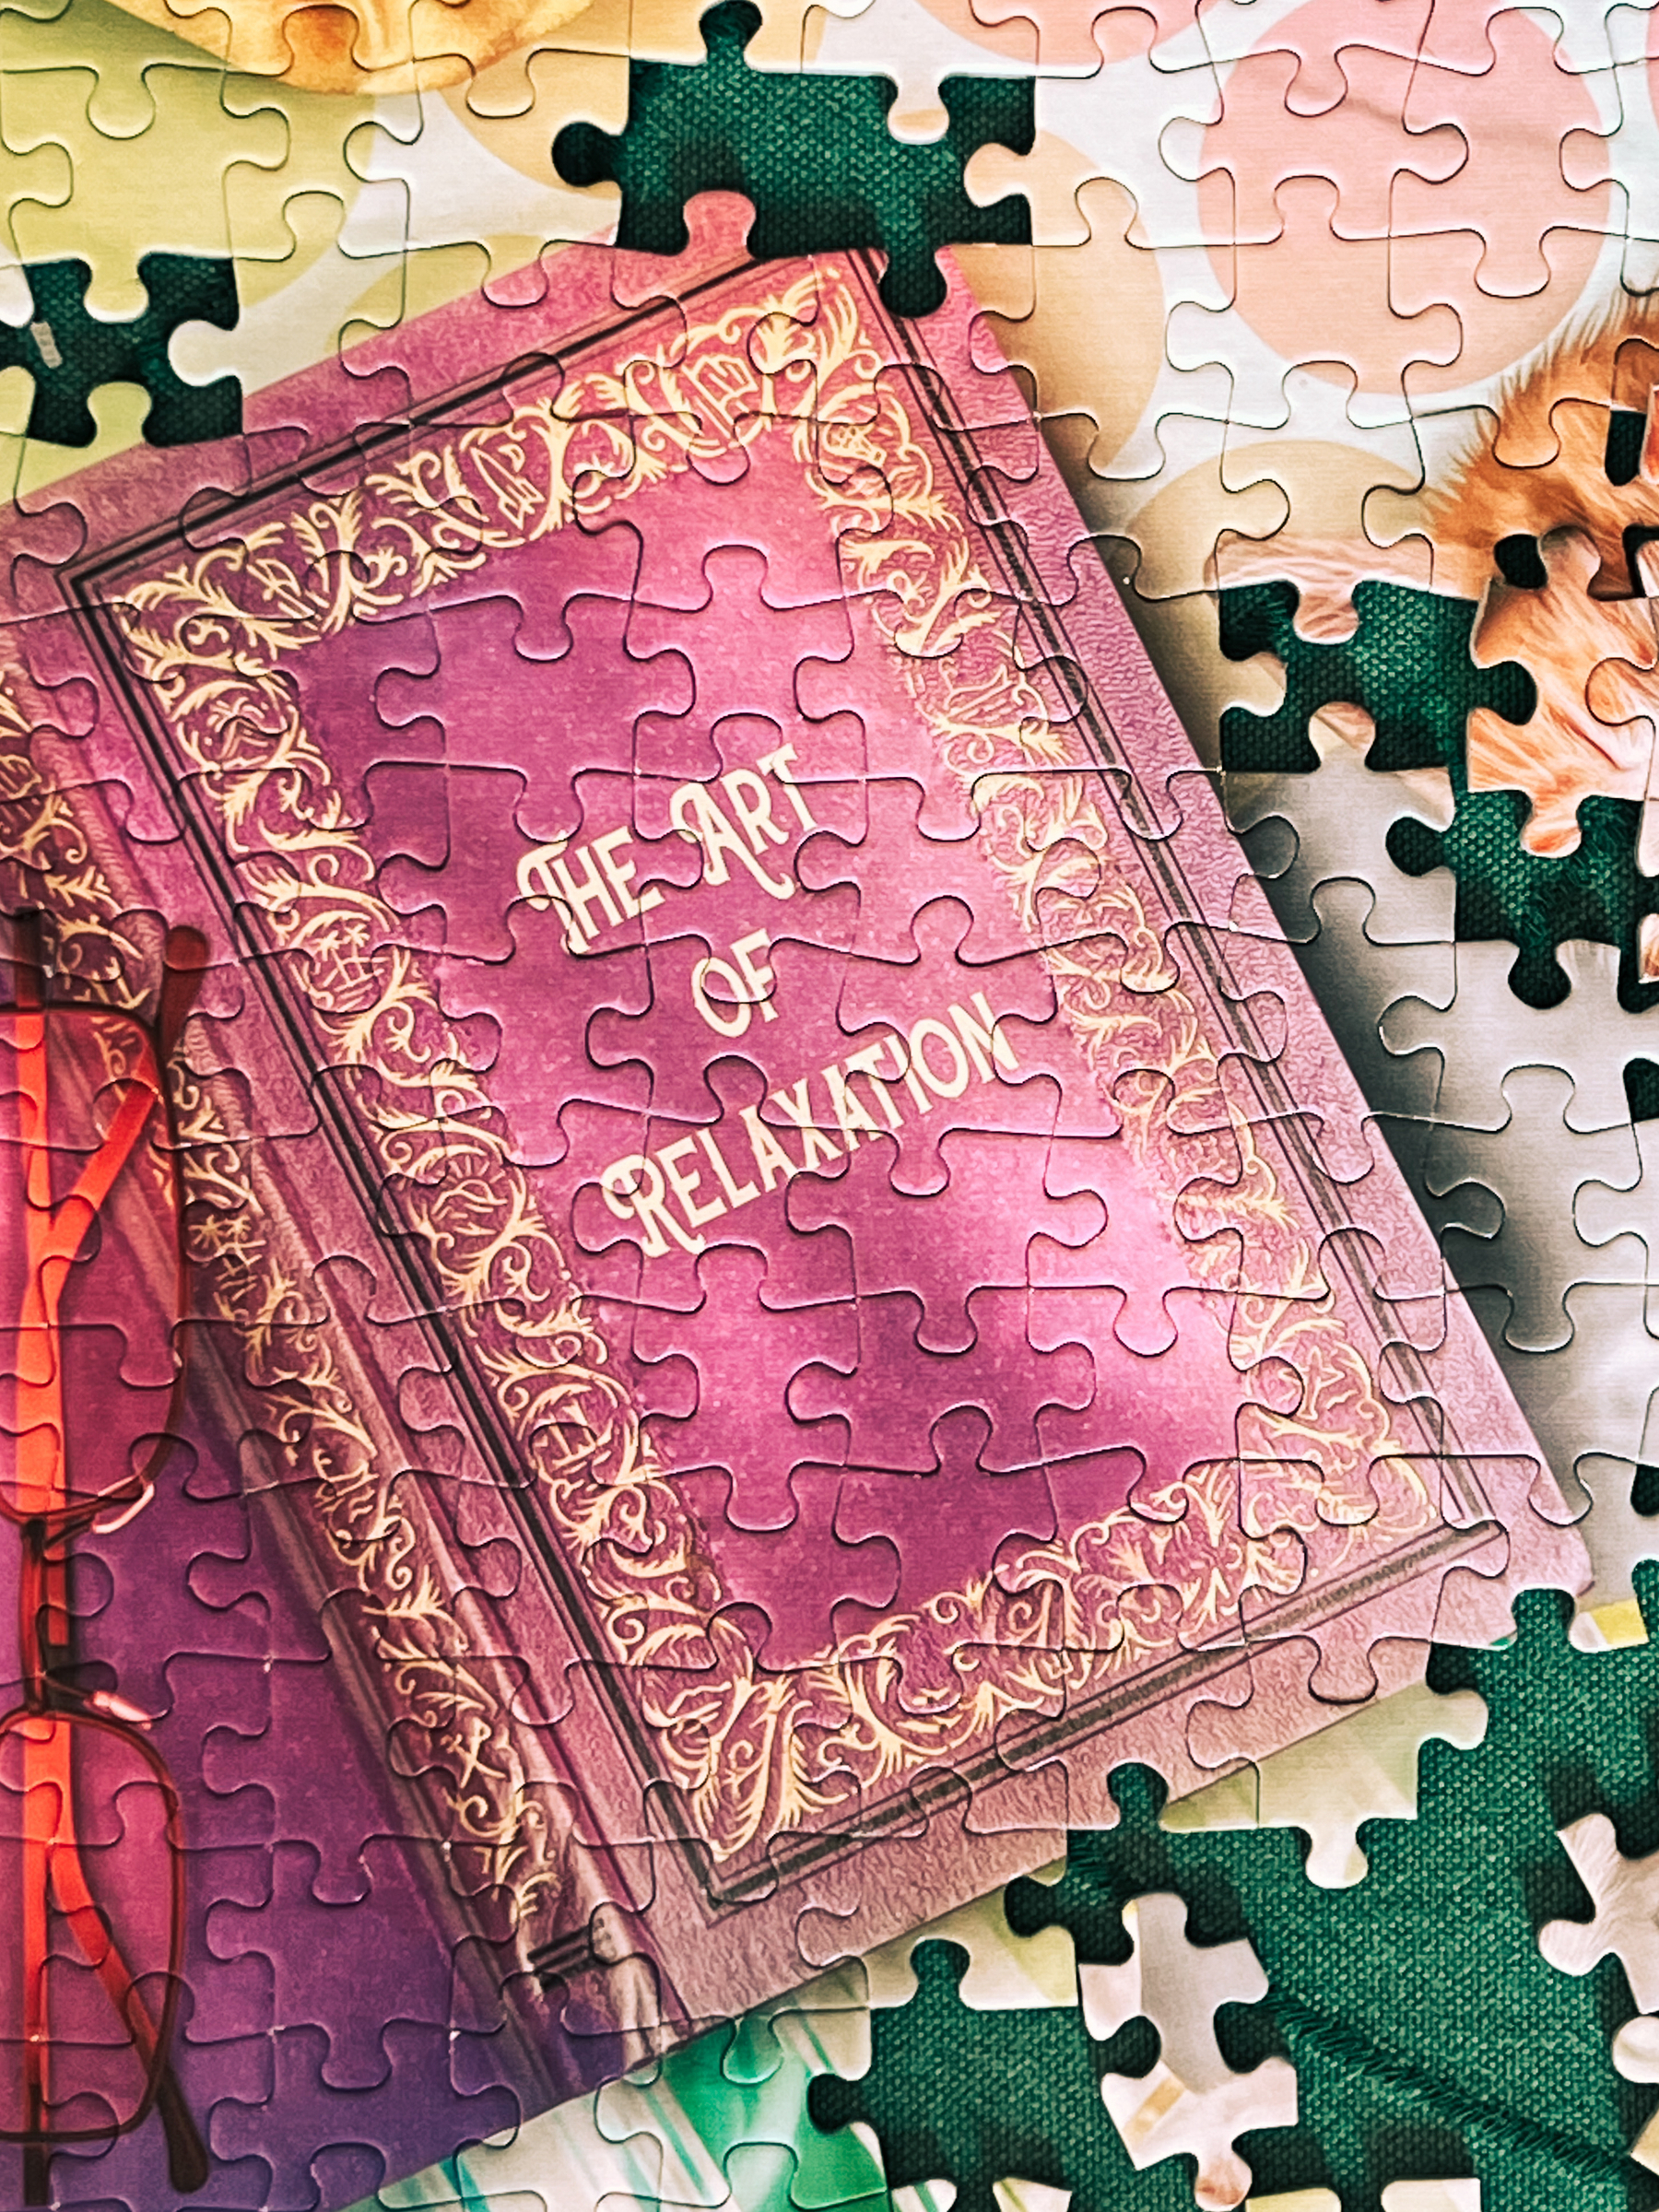 A partially assembled jigsaw puzzle featuring an image of a book with the title &ldquo;The Art of Relaxation&rdquo; on its cover. Some puzzle pieces are unconnected around the edges.